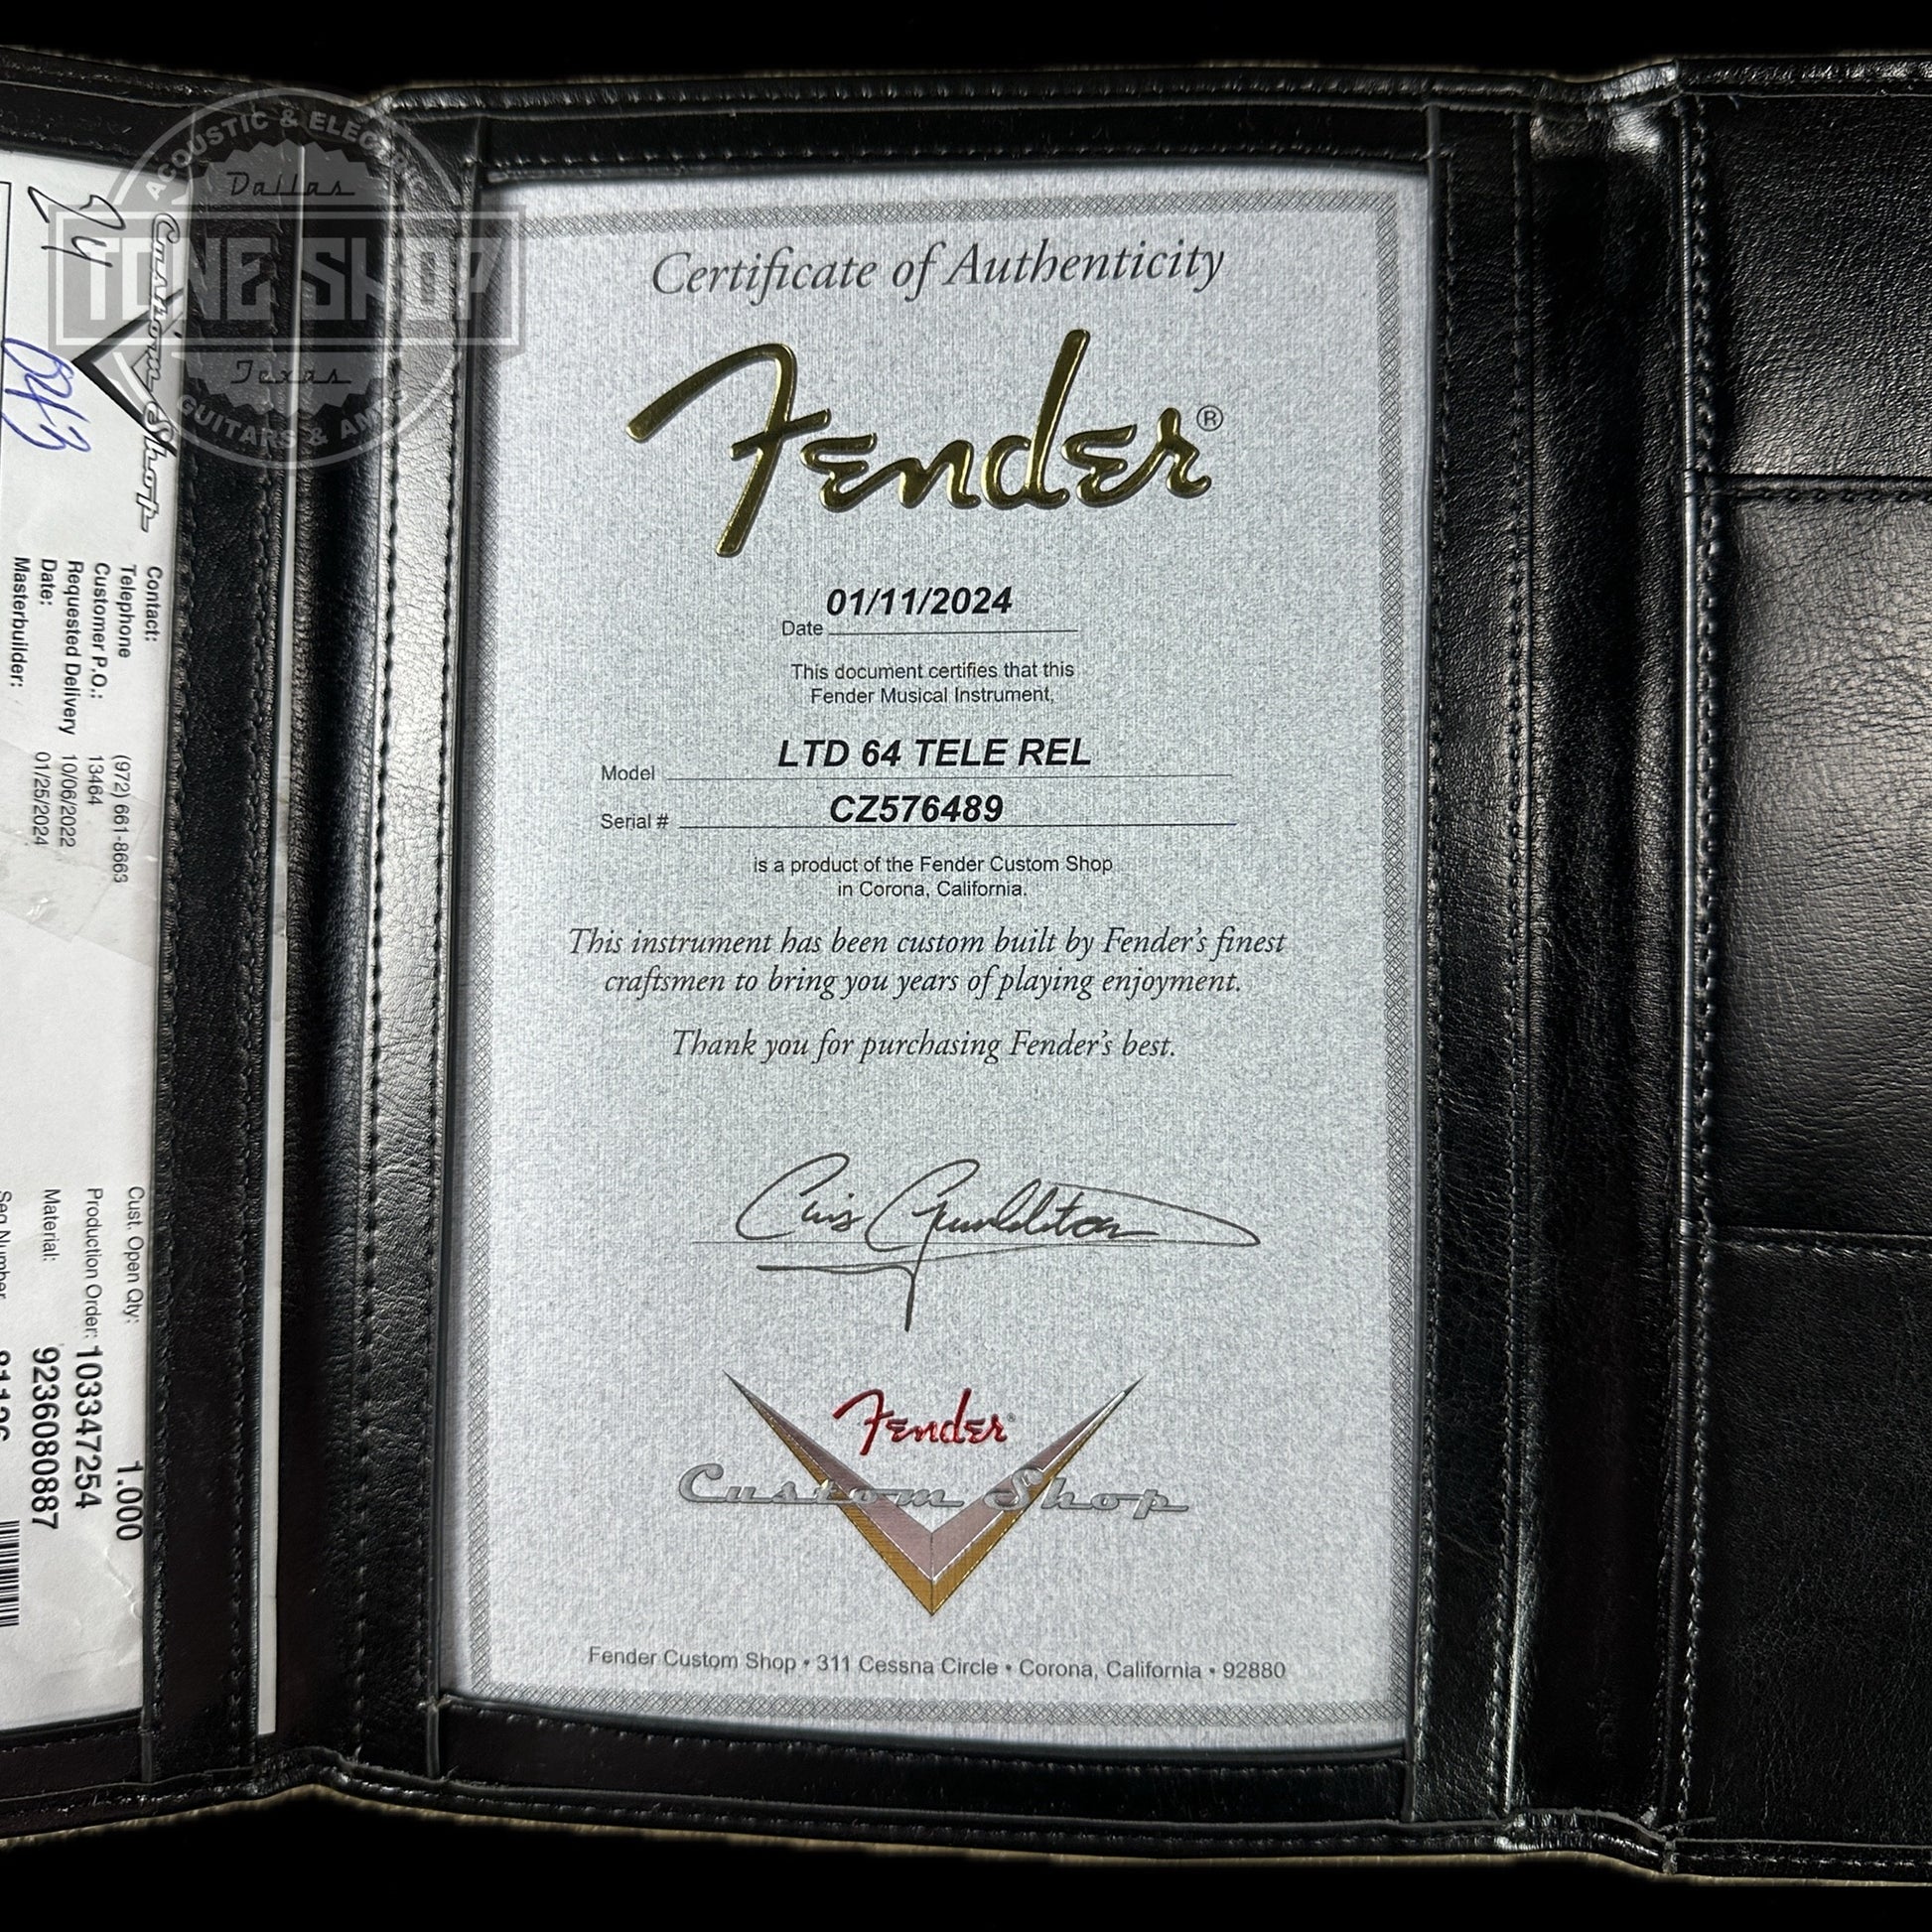 Certificate of authenticity for Fender Custom Shop Limited Edition '64 Tele Relic Aged Lake Placid Blue.